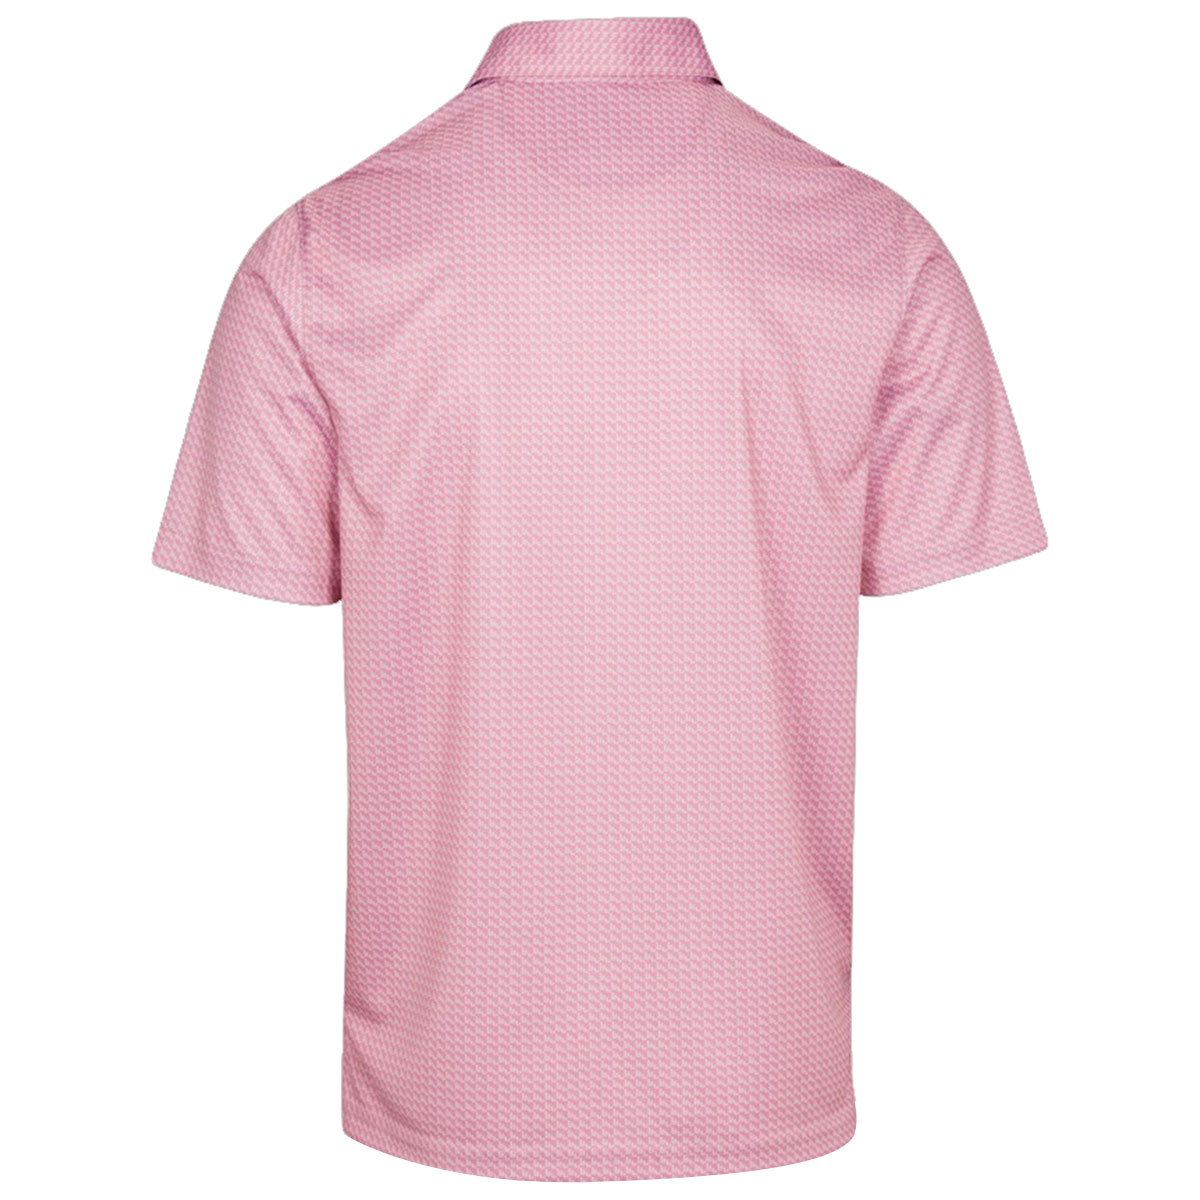 Greg Norman Men's ML75 Microlux Whale Tail Print Golf Polo Shirt from ...